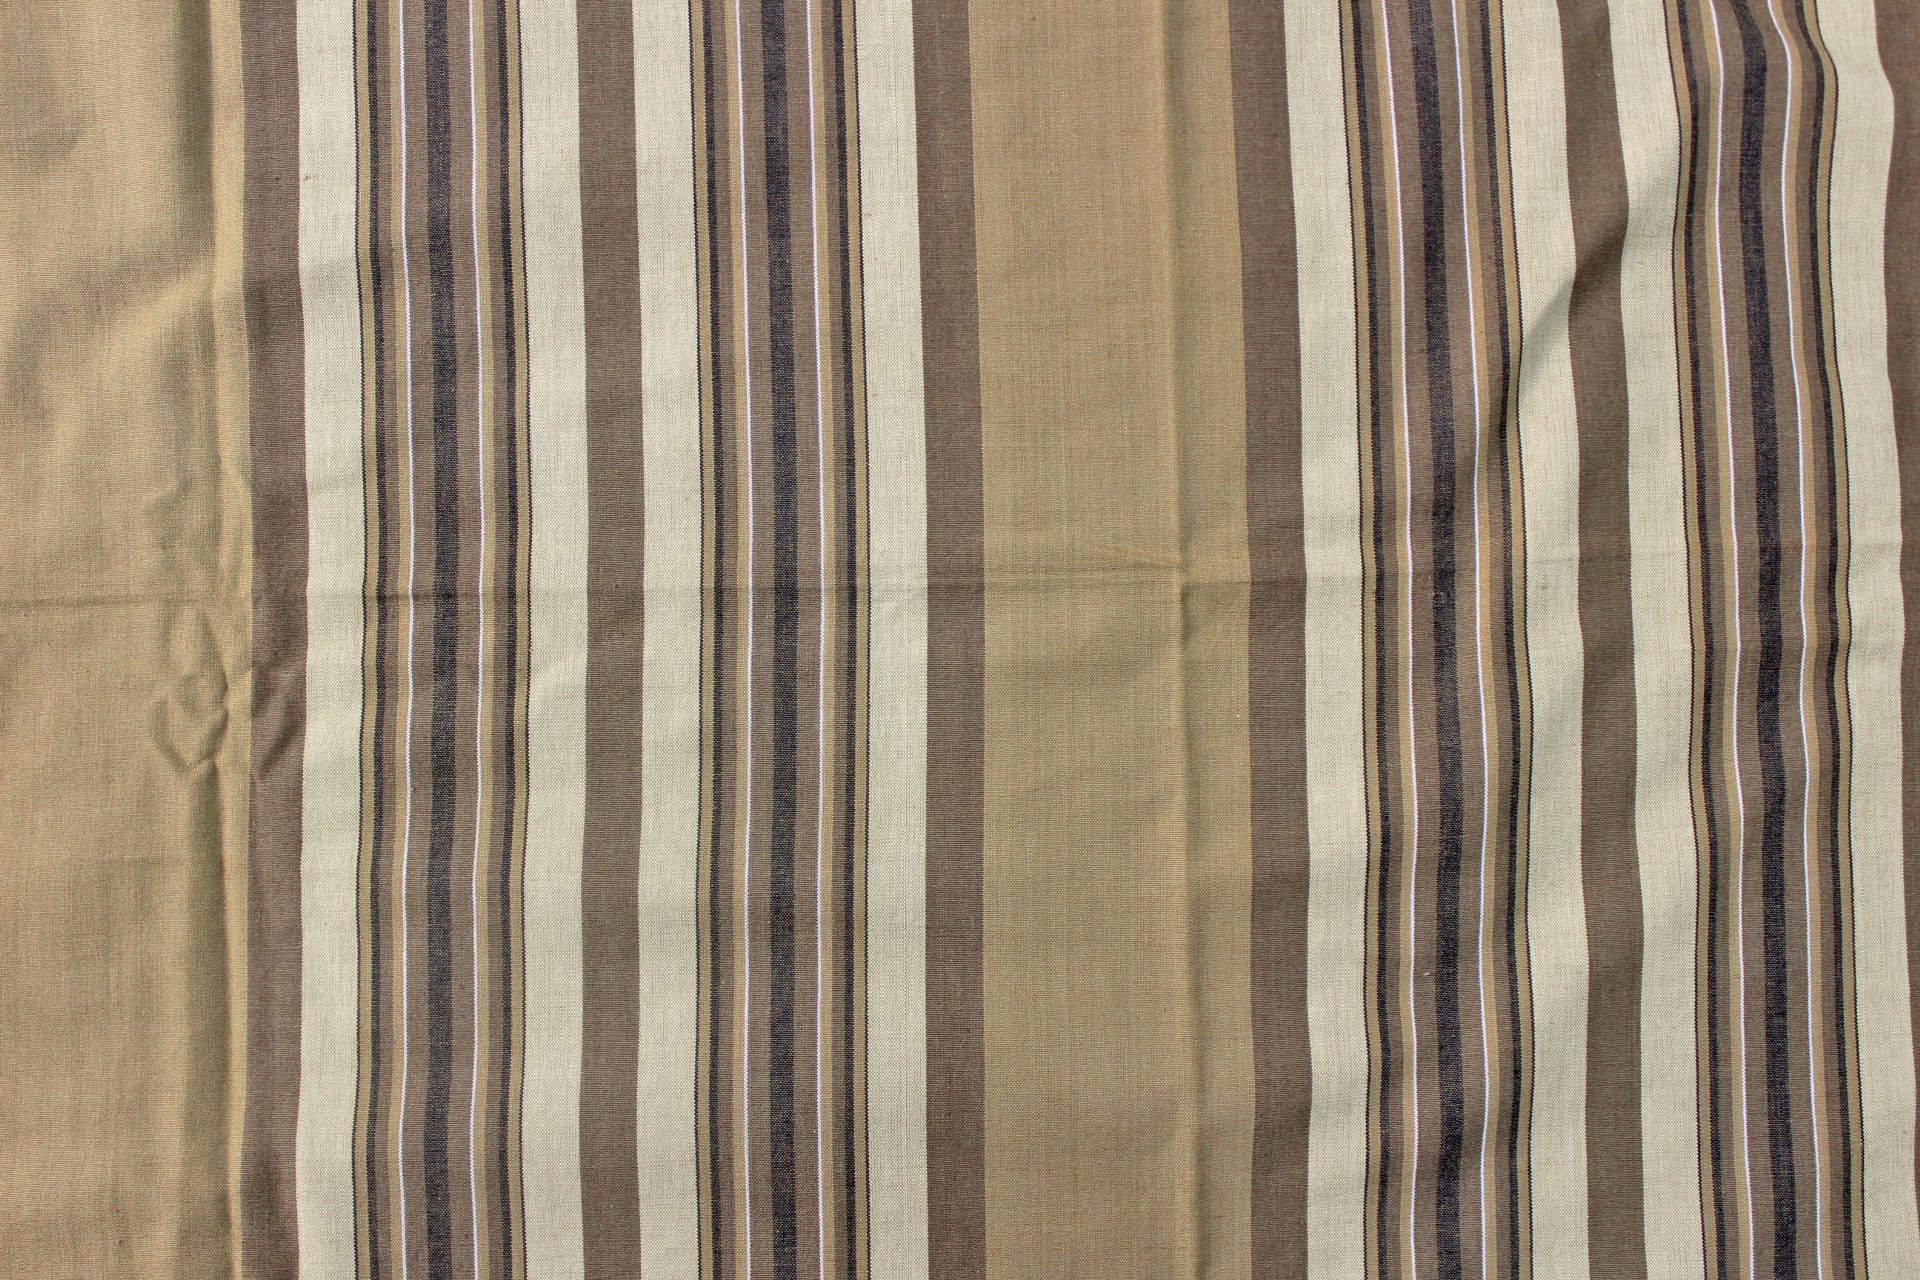 Elegant Alpha Woven 100% Cotton Handloom Bed Cover online in India